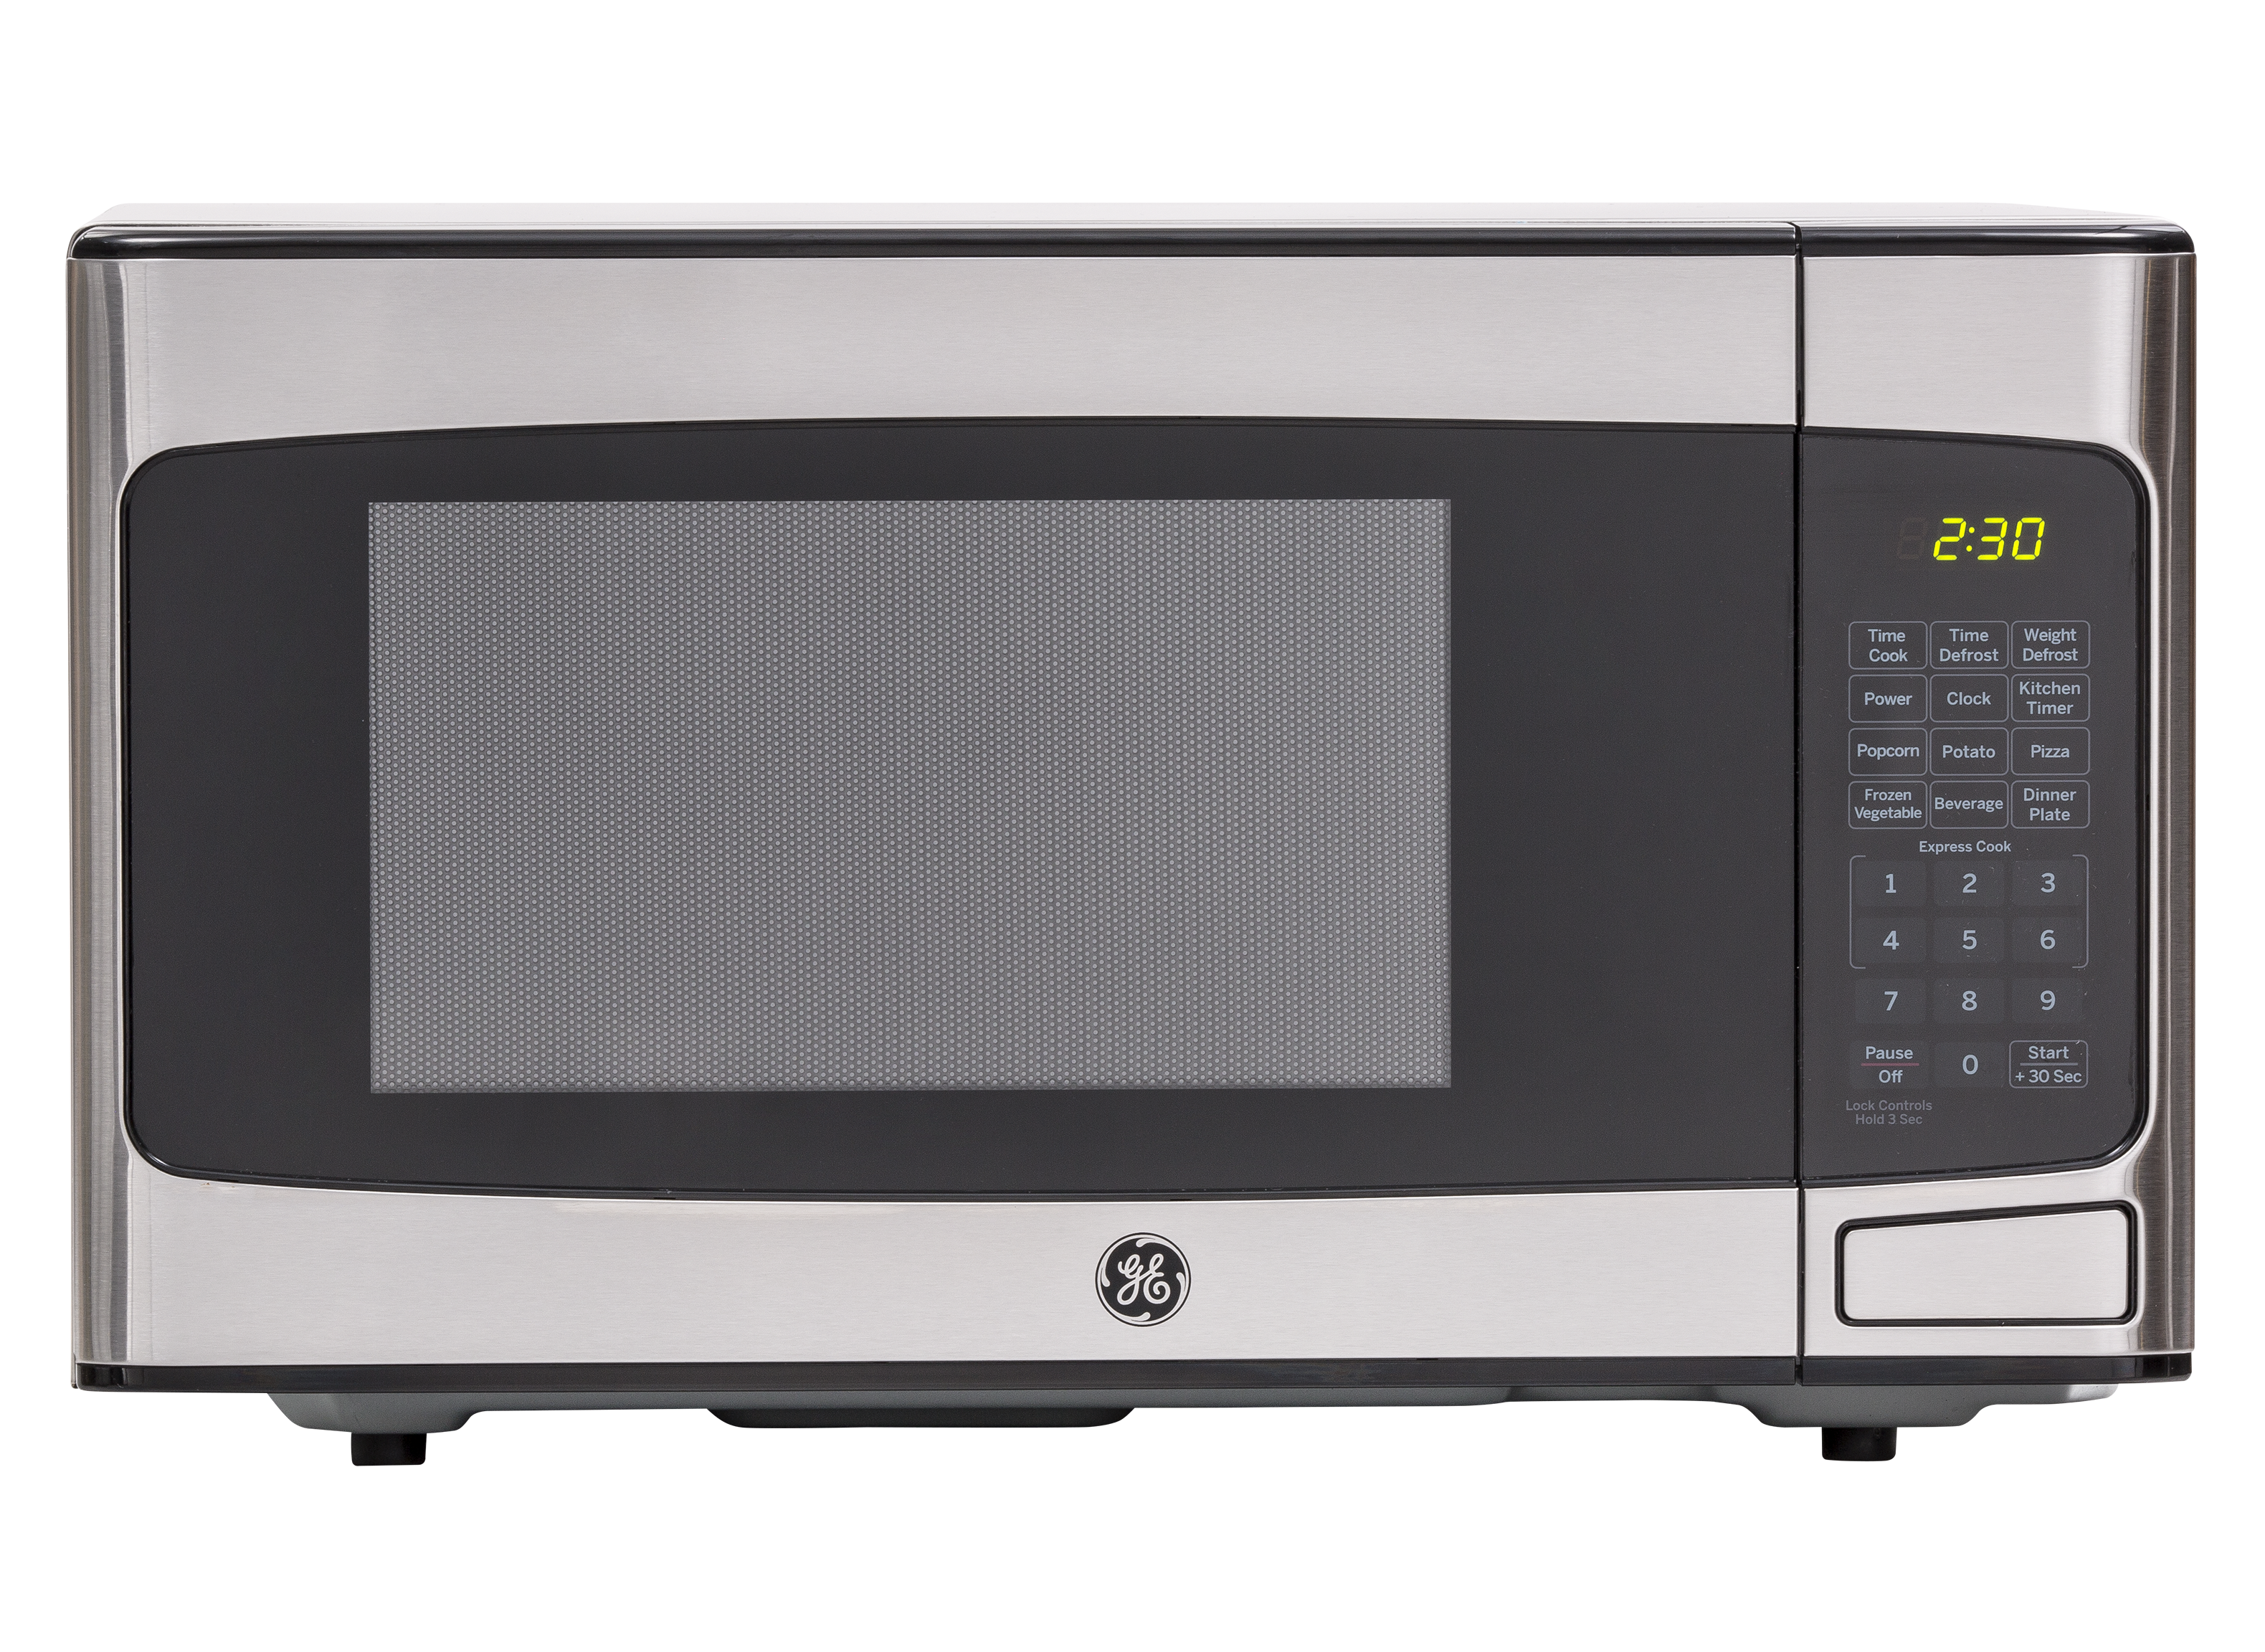 https://crdms.images.consumerreports.org/prod/products/cr/models/393849-countertopmicrowaveovens-ge-jes1145shss.png